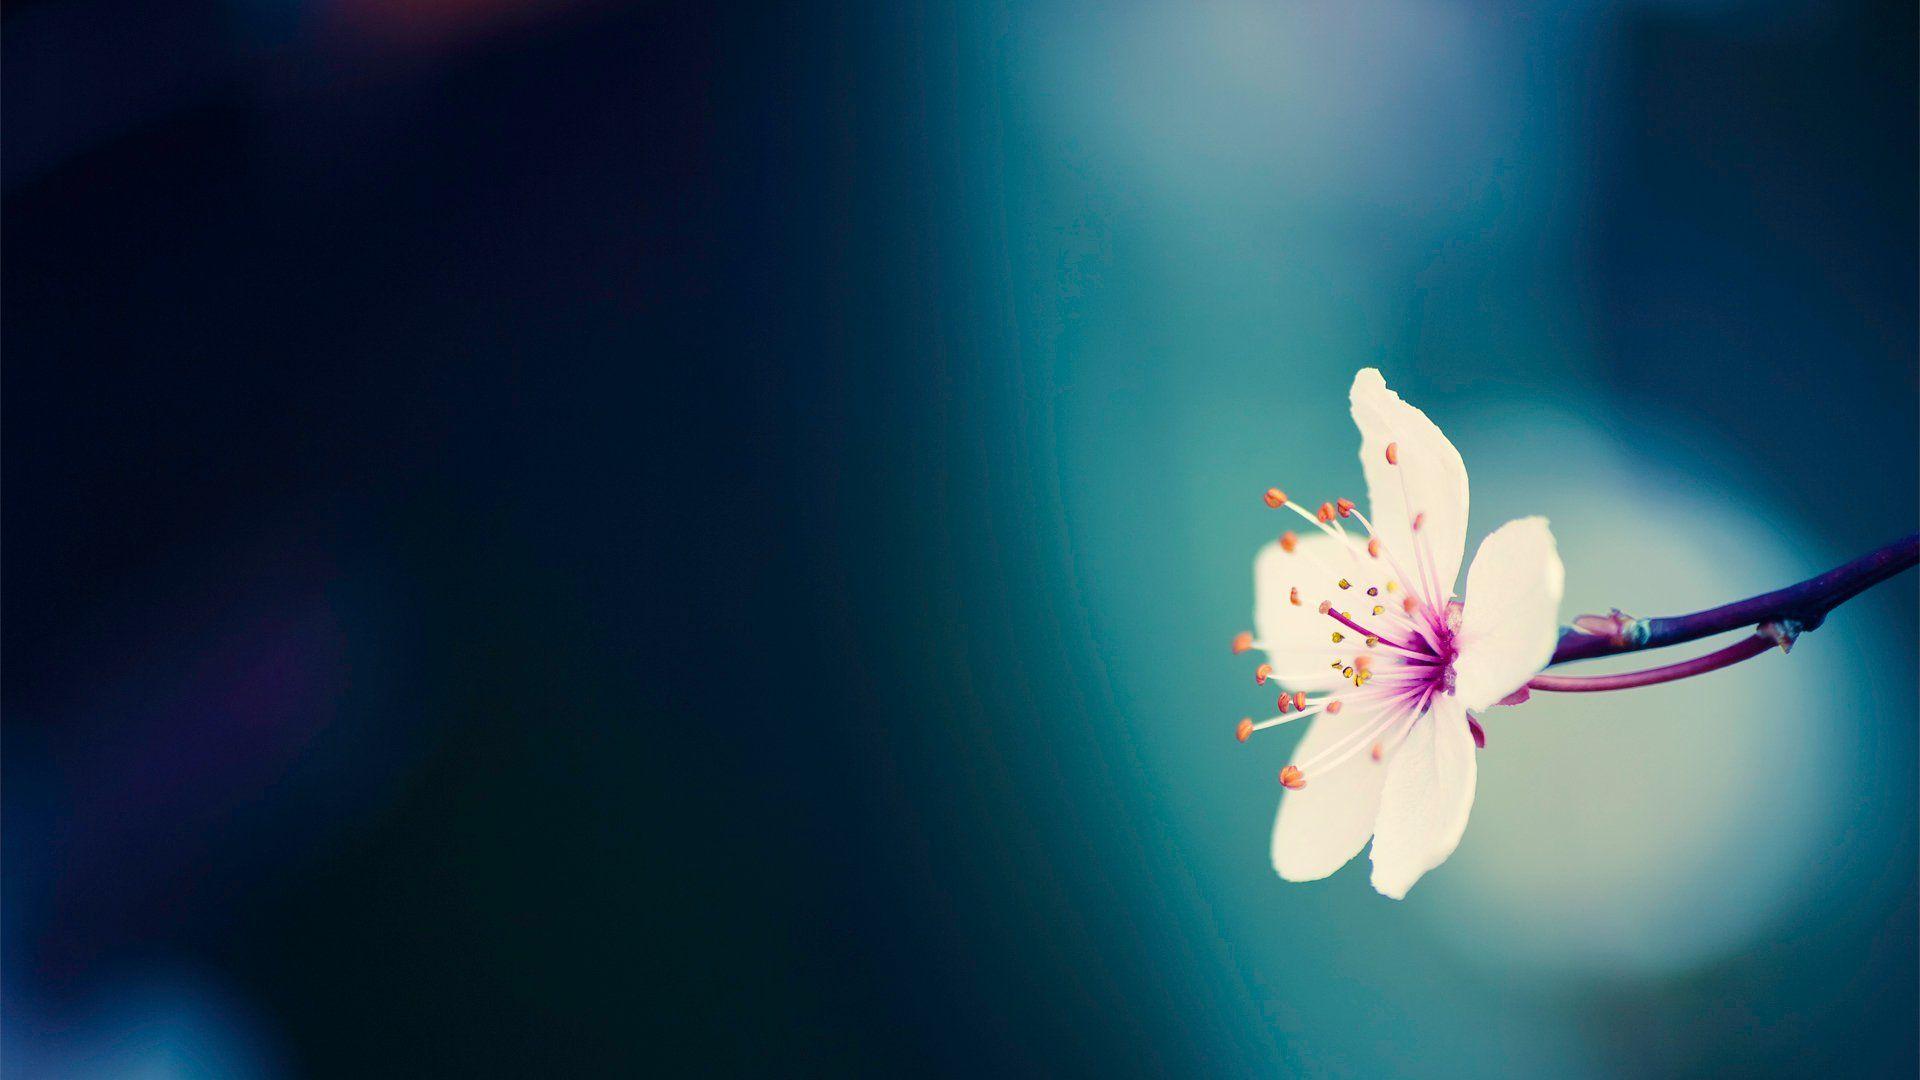 amazing flower wallpaper to add a splash of color to your devices